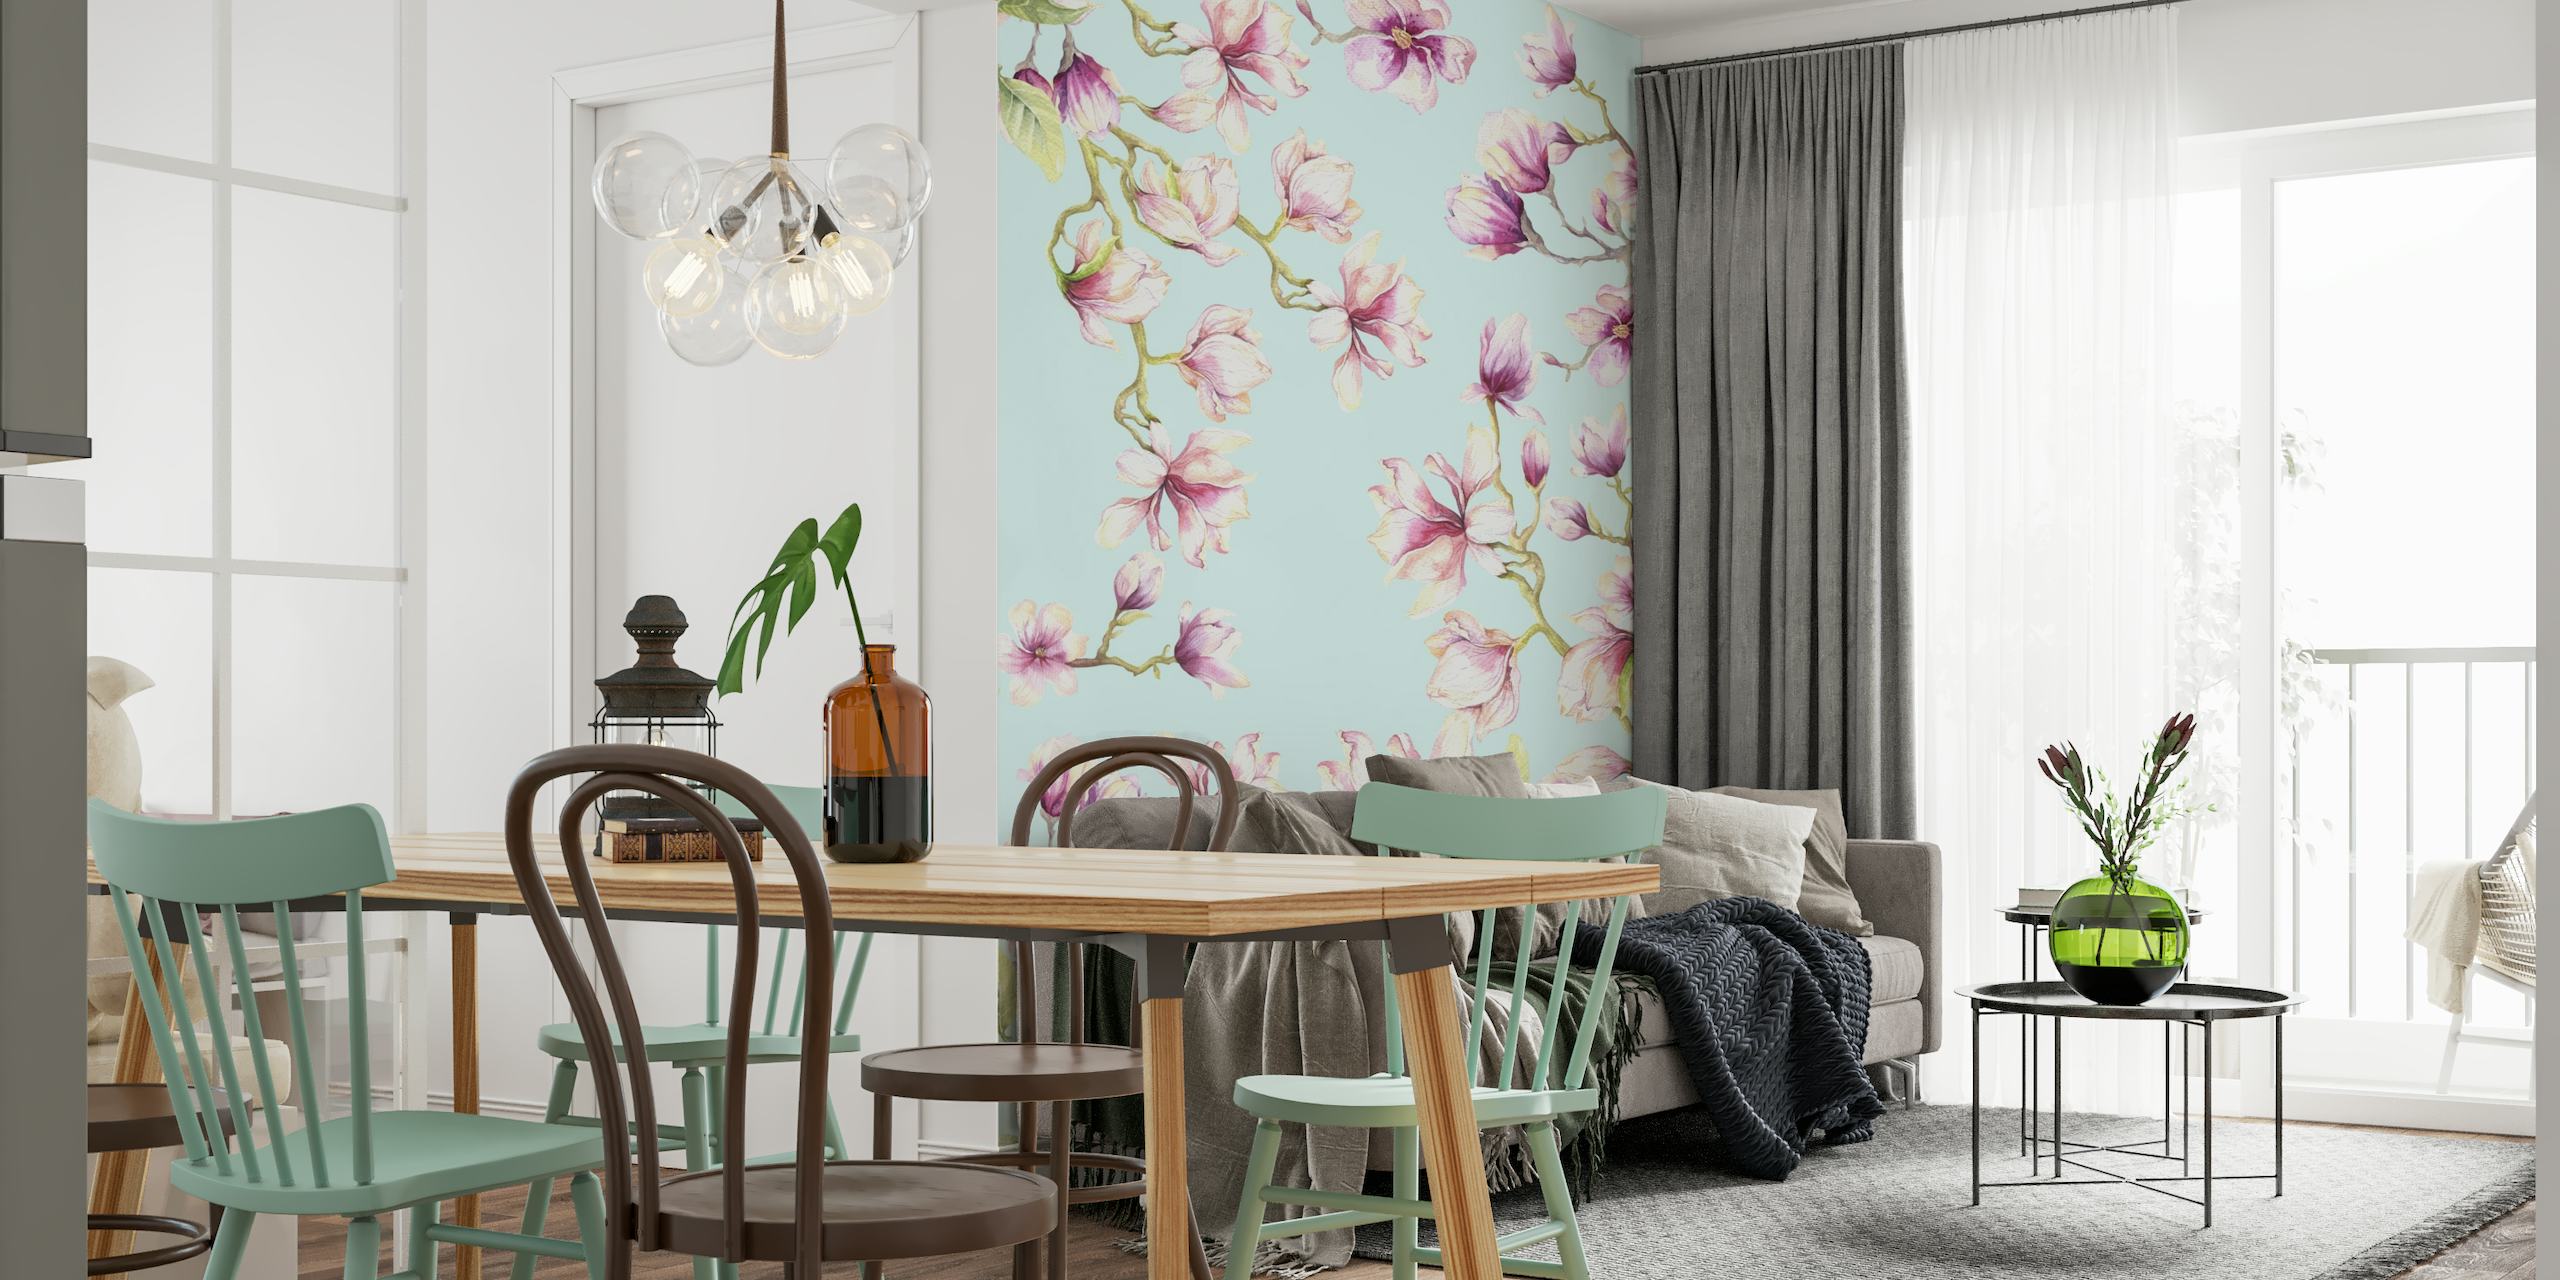 Delicate Magnolia floral wall mural with pink and violet flowers